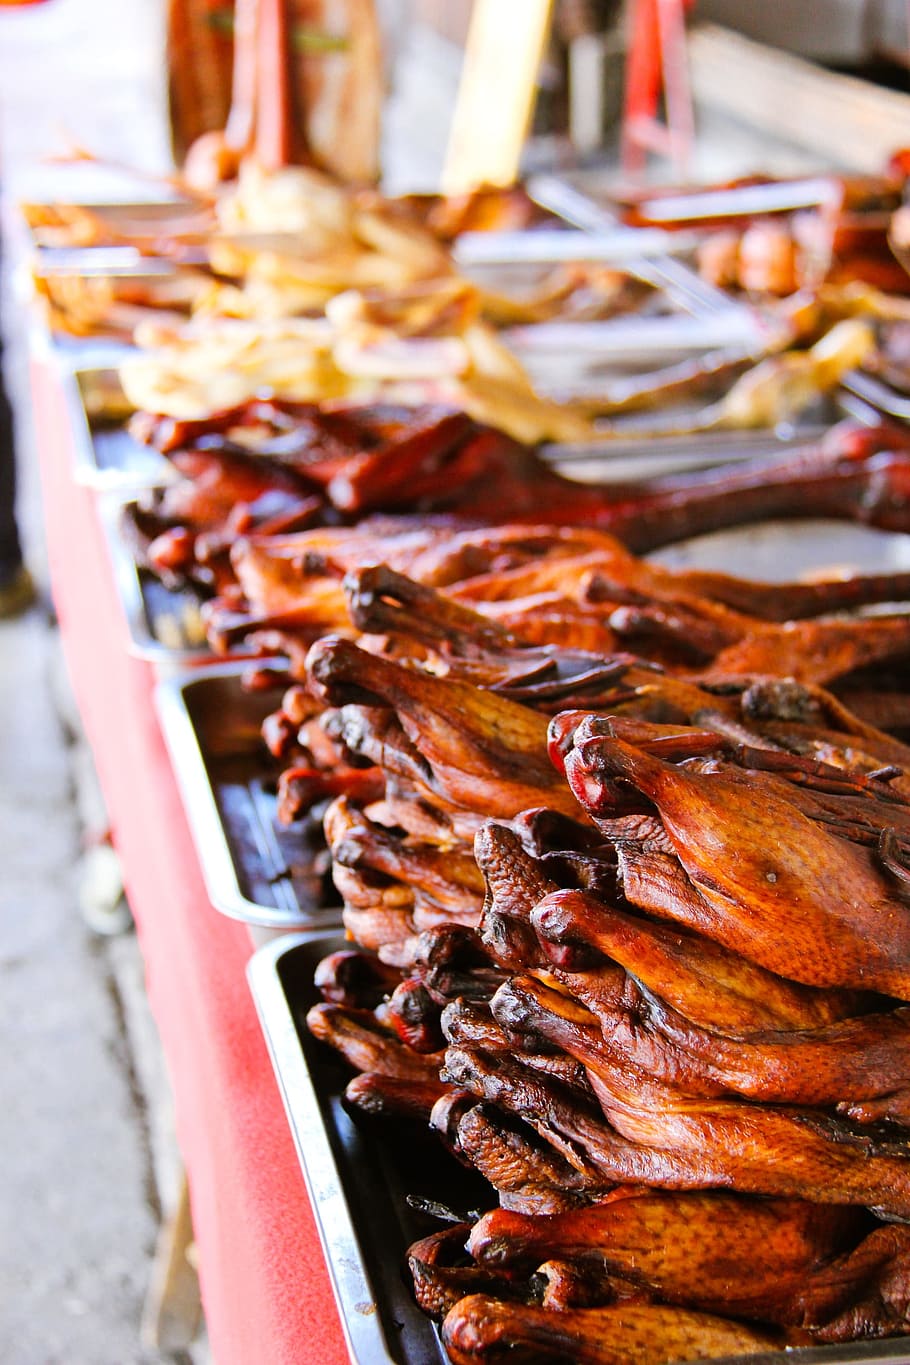 cured meat, chicken, duck, anchang town, incense, simple, red, food and drink, food, freshness